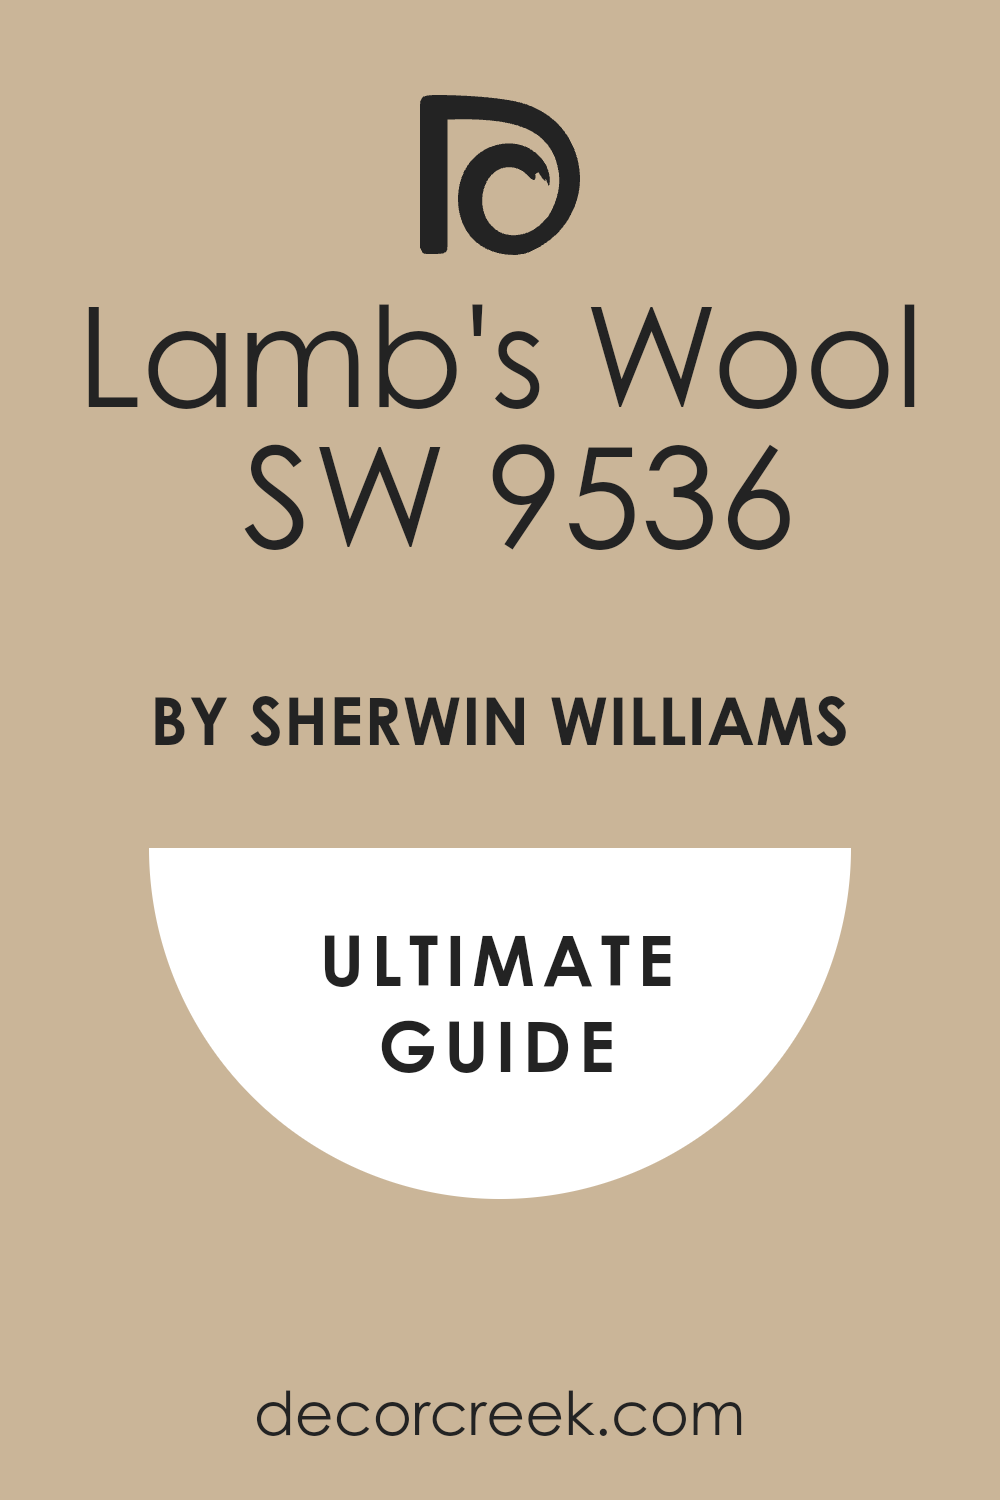 lambs_wool_sw_9536_paint_color_by_sherwin_williams_ultimate_guide